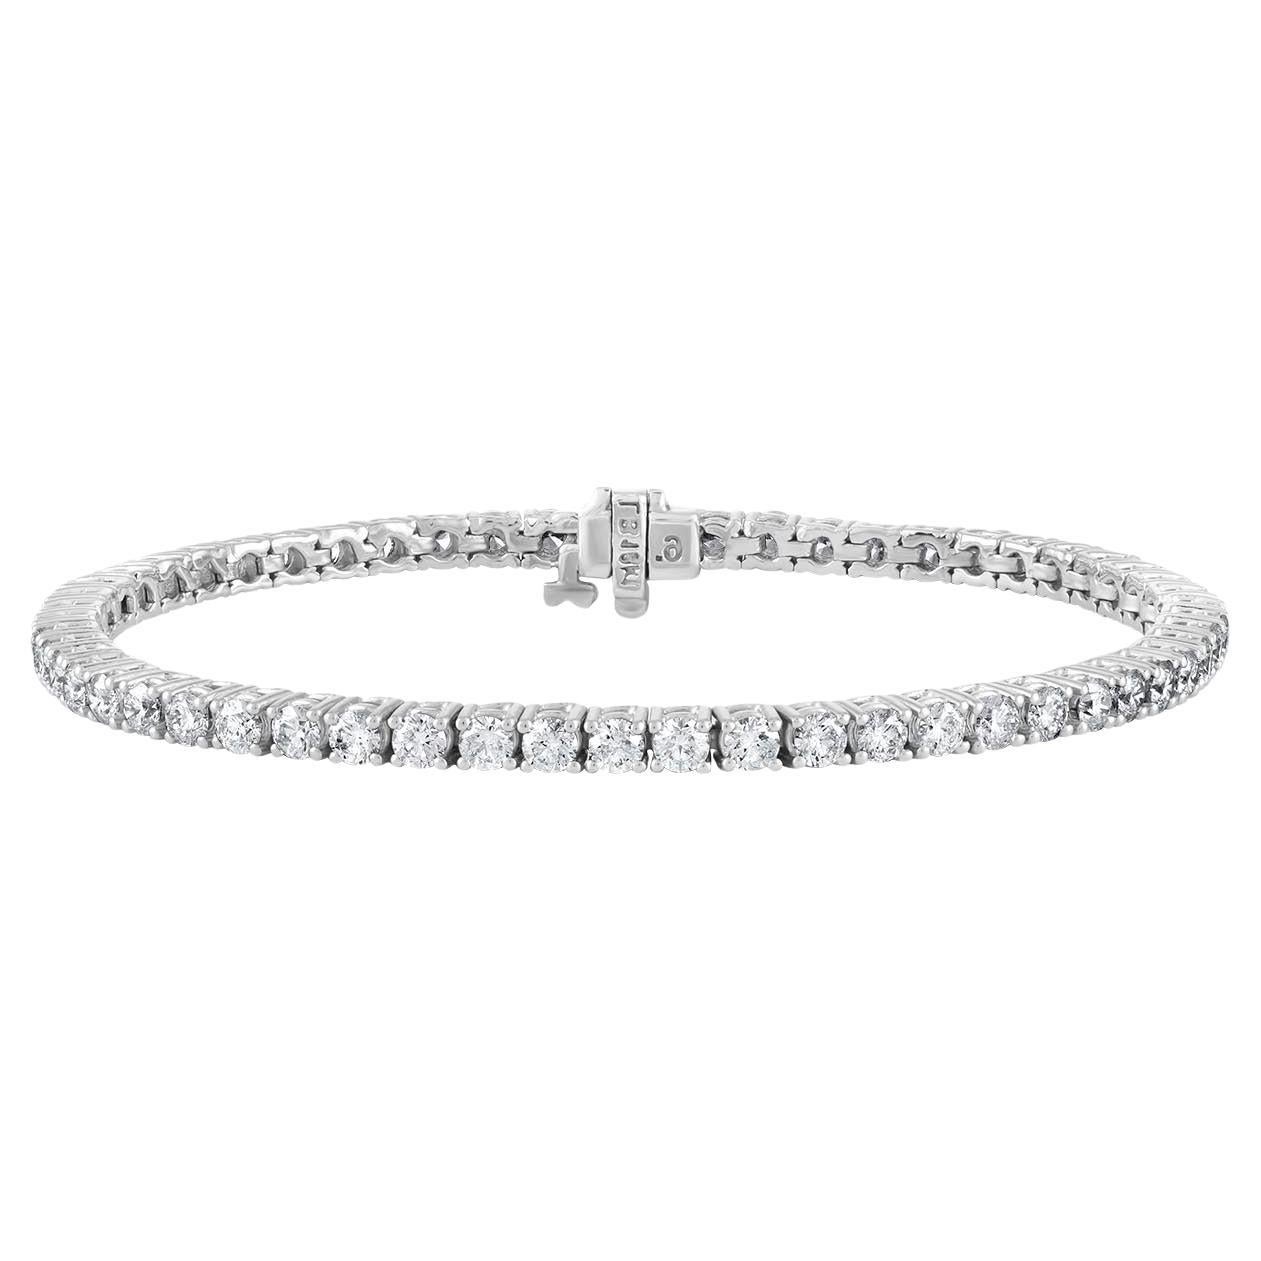 Diana M. 14kt white gold tennis bracelet featuring 2.00 cts tw of round diamonds For Sale